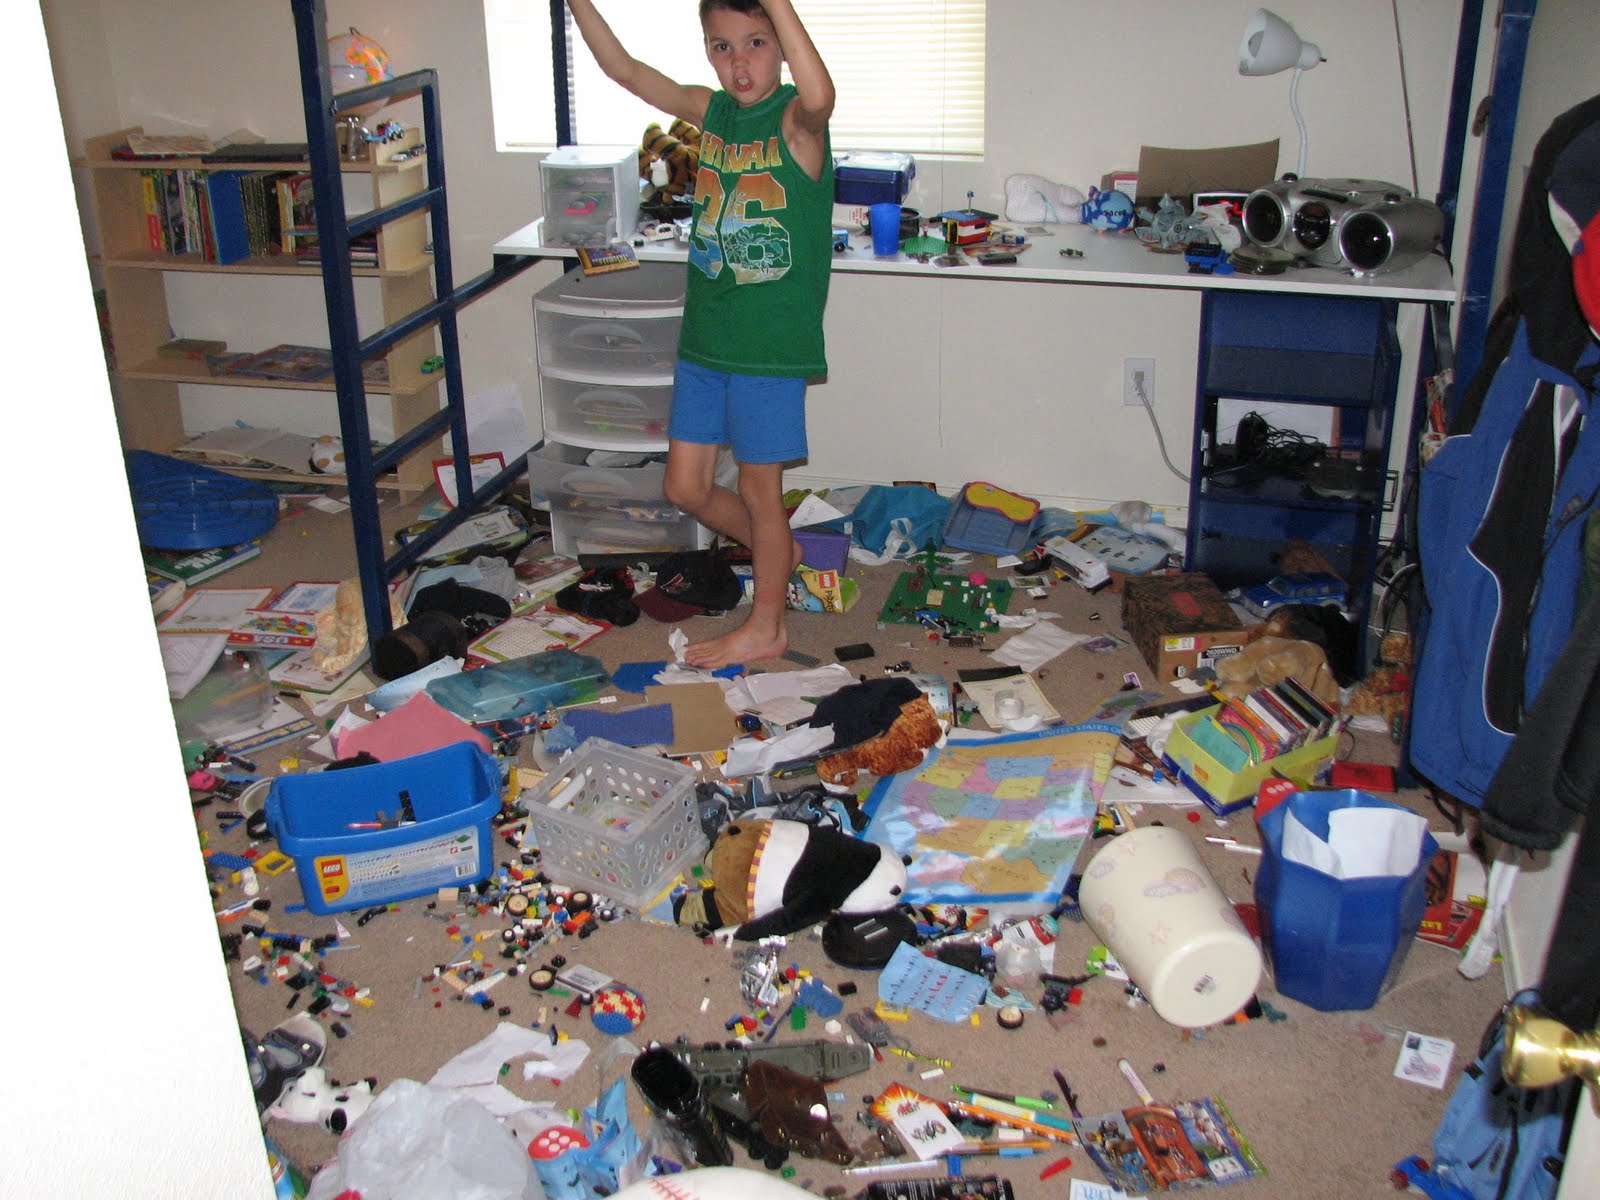 My Crazy Kids: 1st Week of August-The Chornicles of Jake's Dirty Room